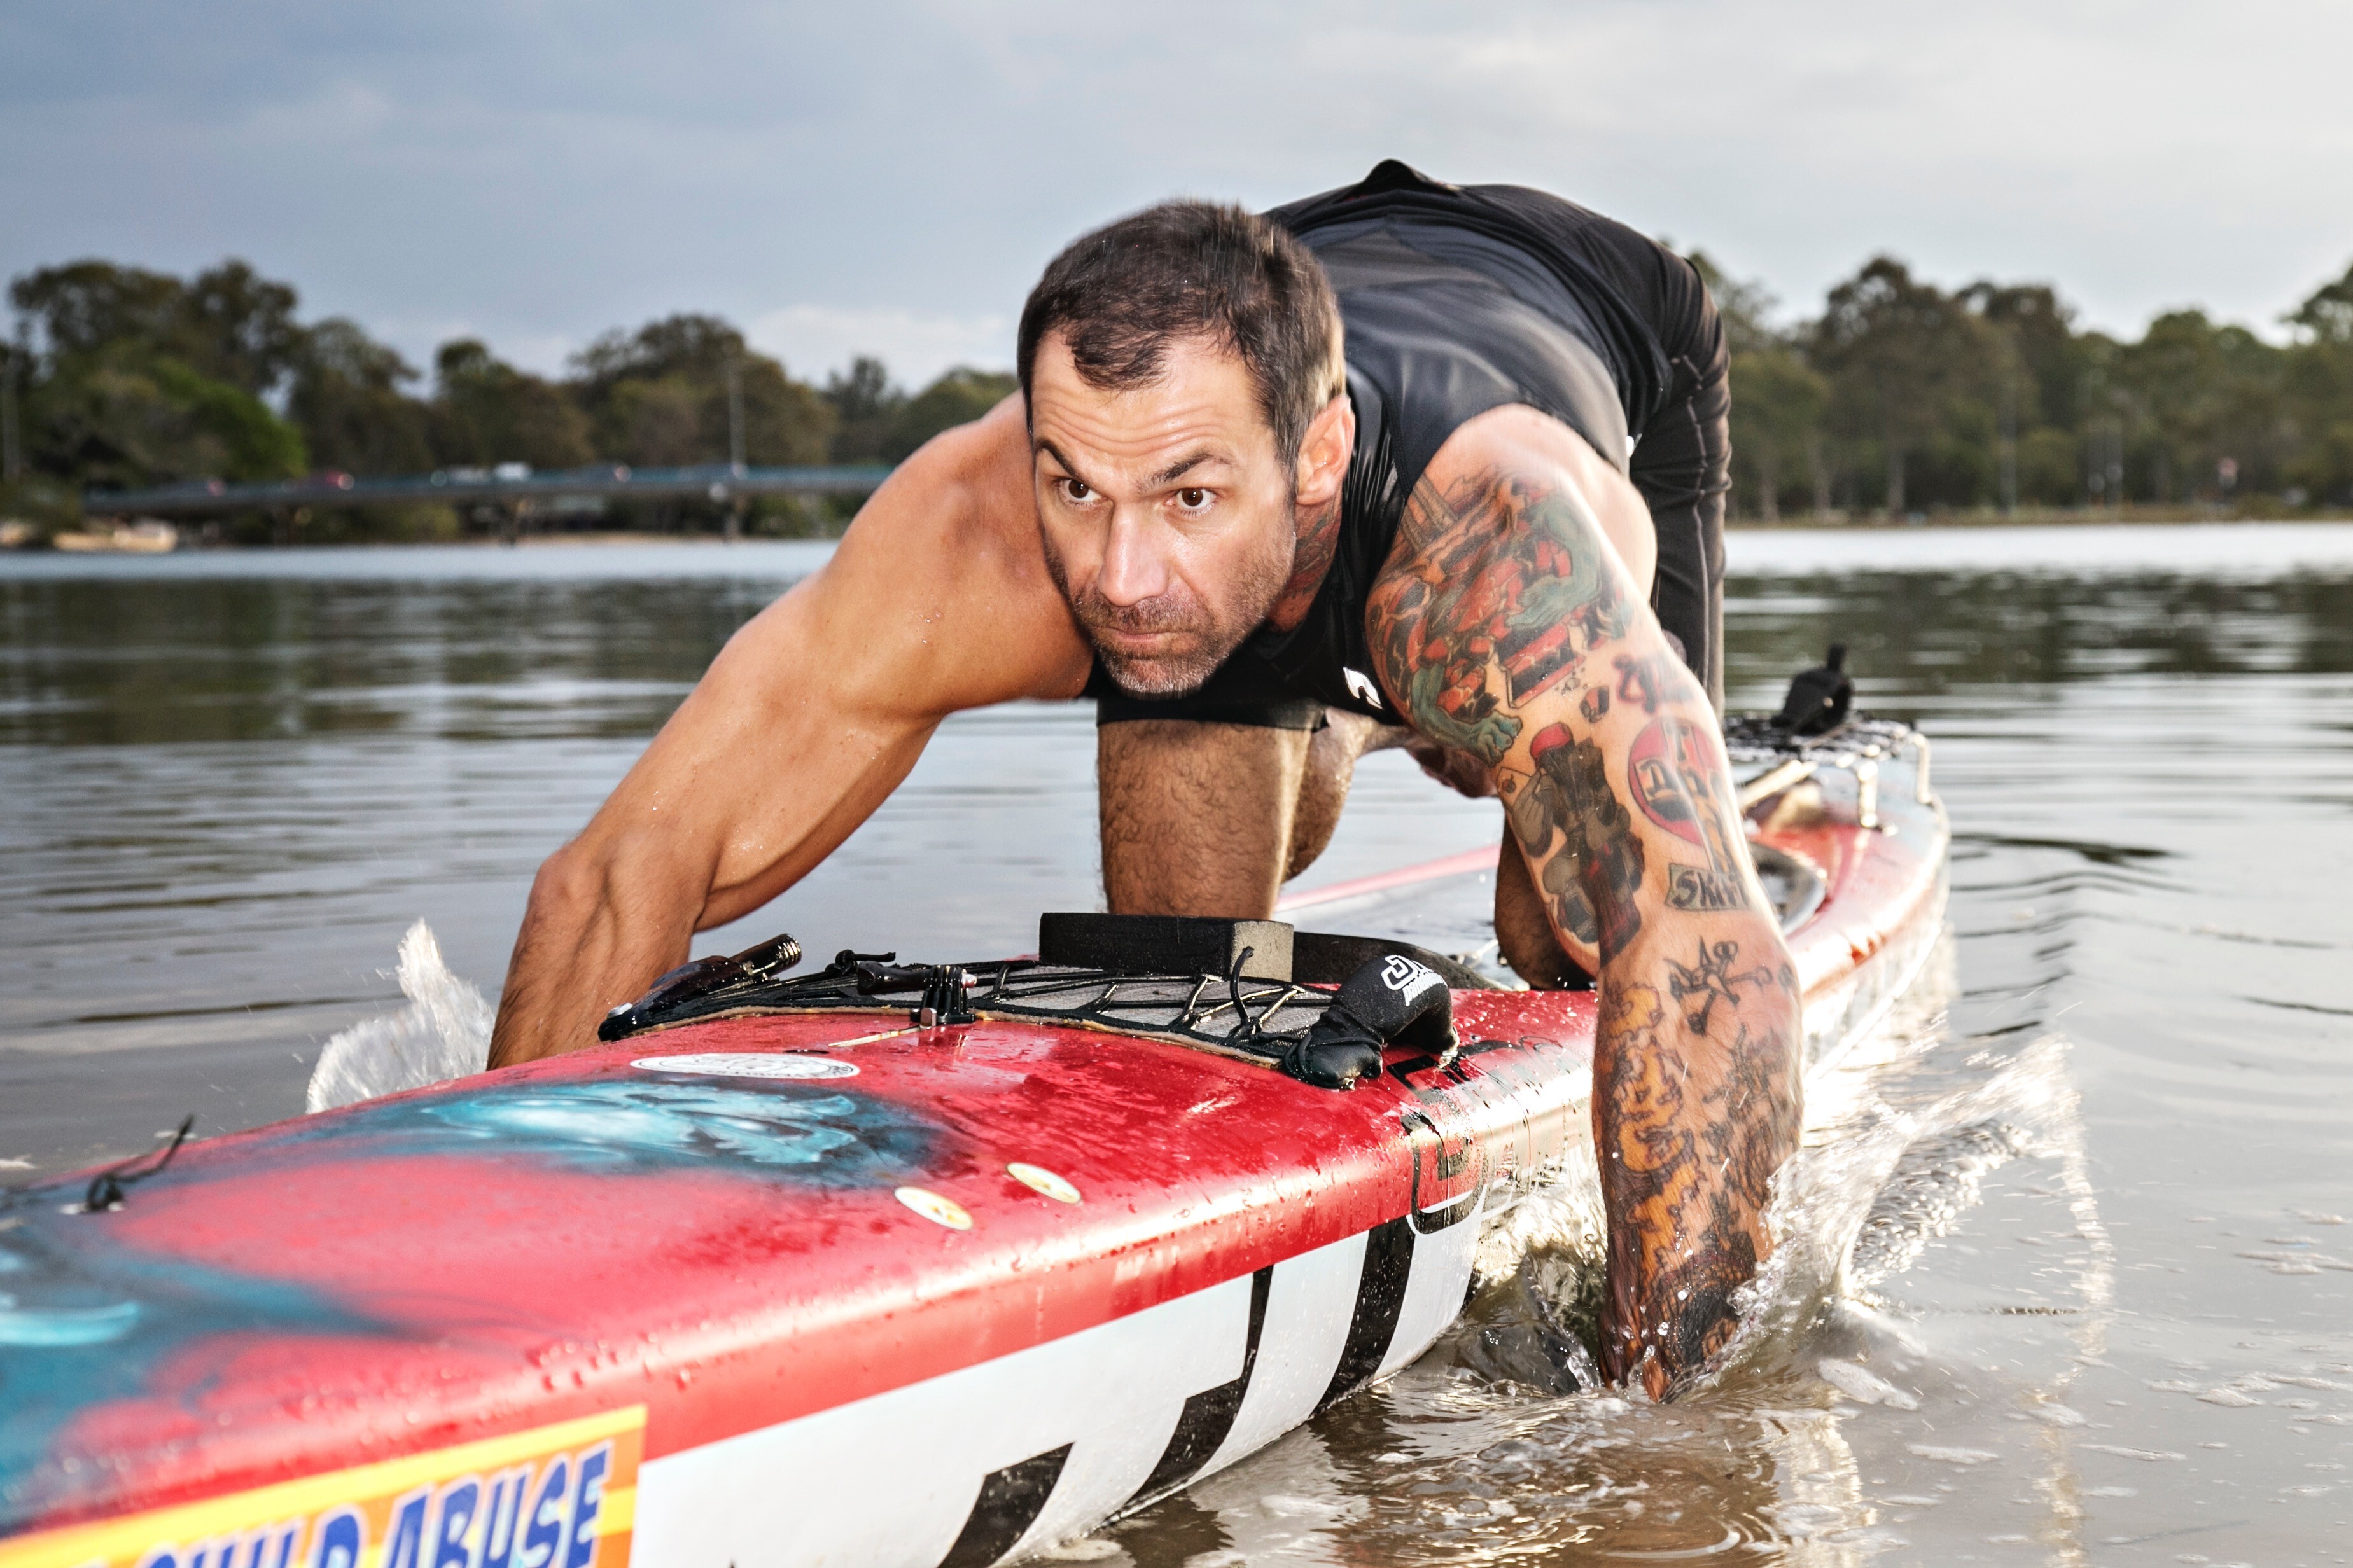 Damien Rider took up endurance sports to change his life after a childhood of physical and sexual abuse. One epic paddle-board journey showed him how resilient he could be.